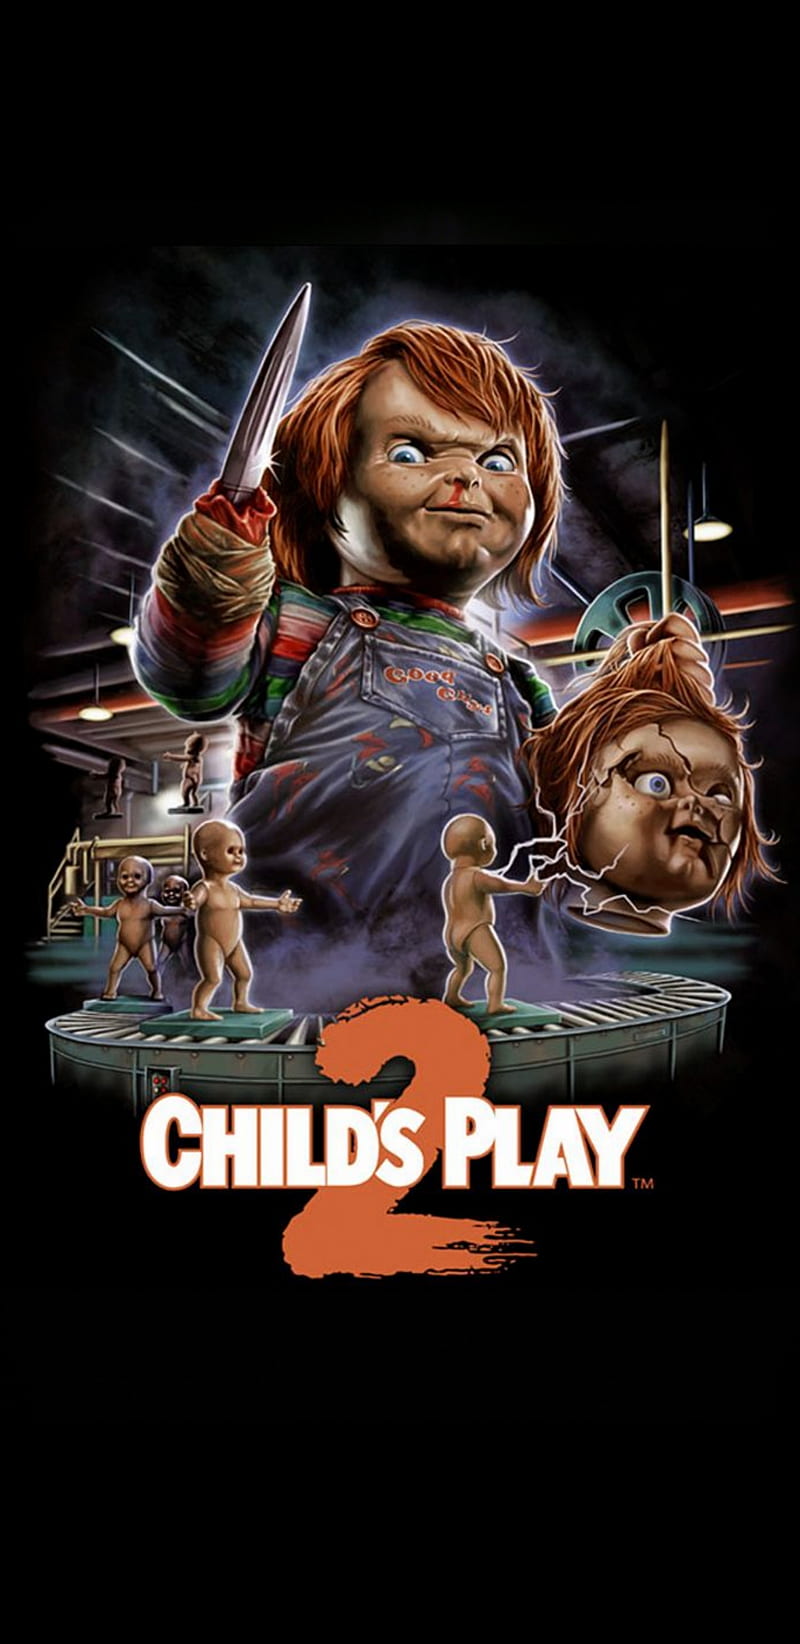 Childs Play 2 Chucky, charles lee ray, childs play, horror, killer doll, HD phone wallpaper